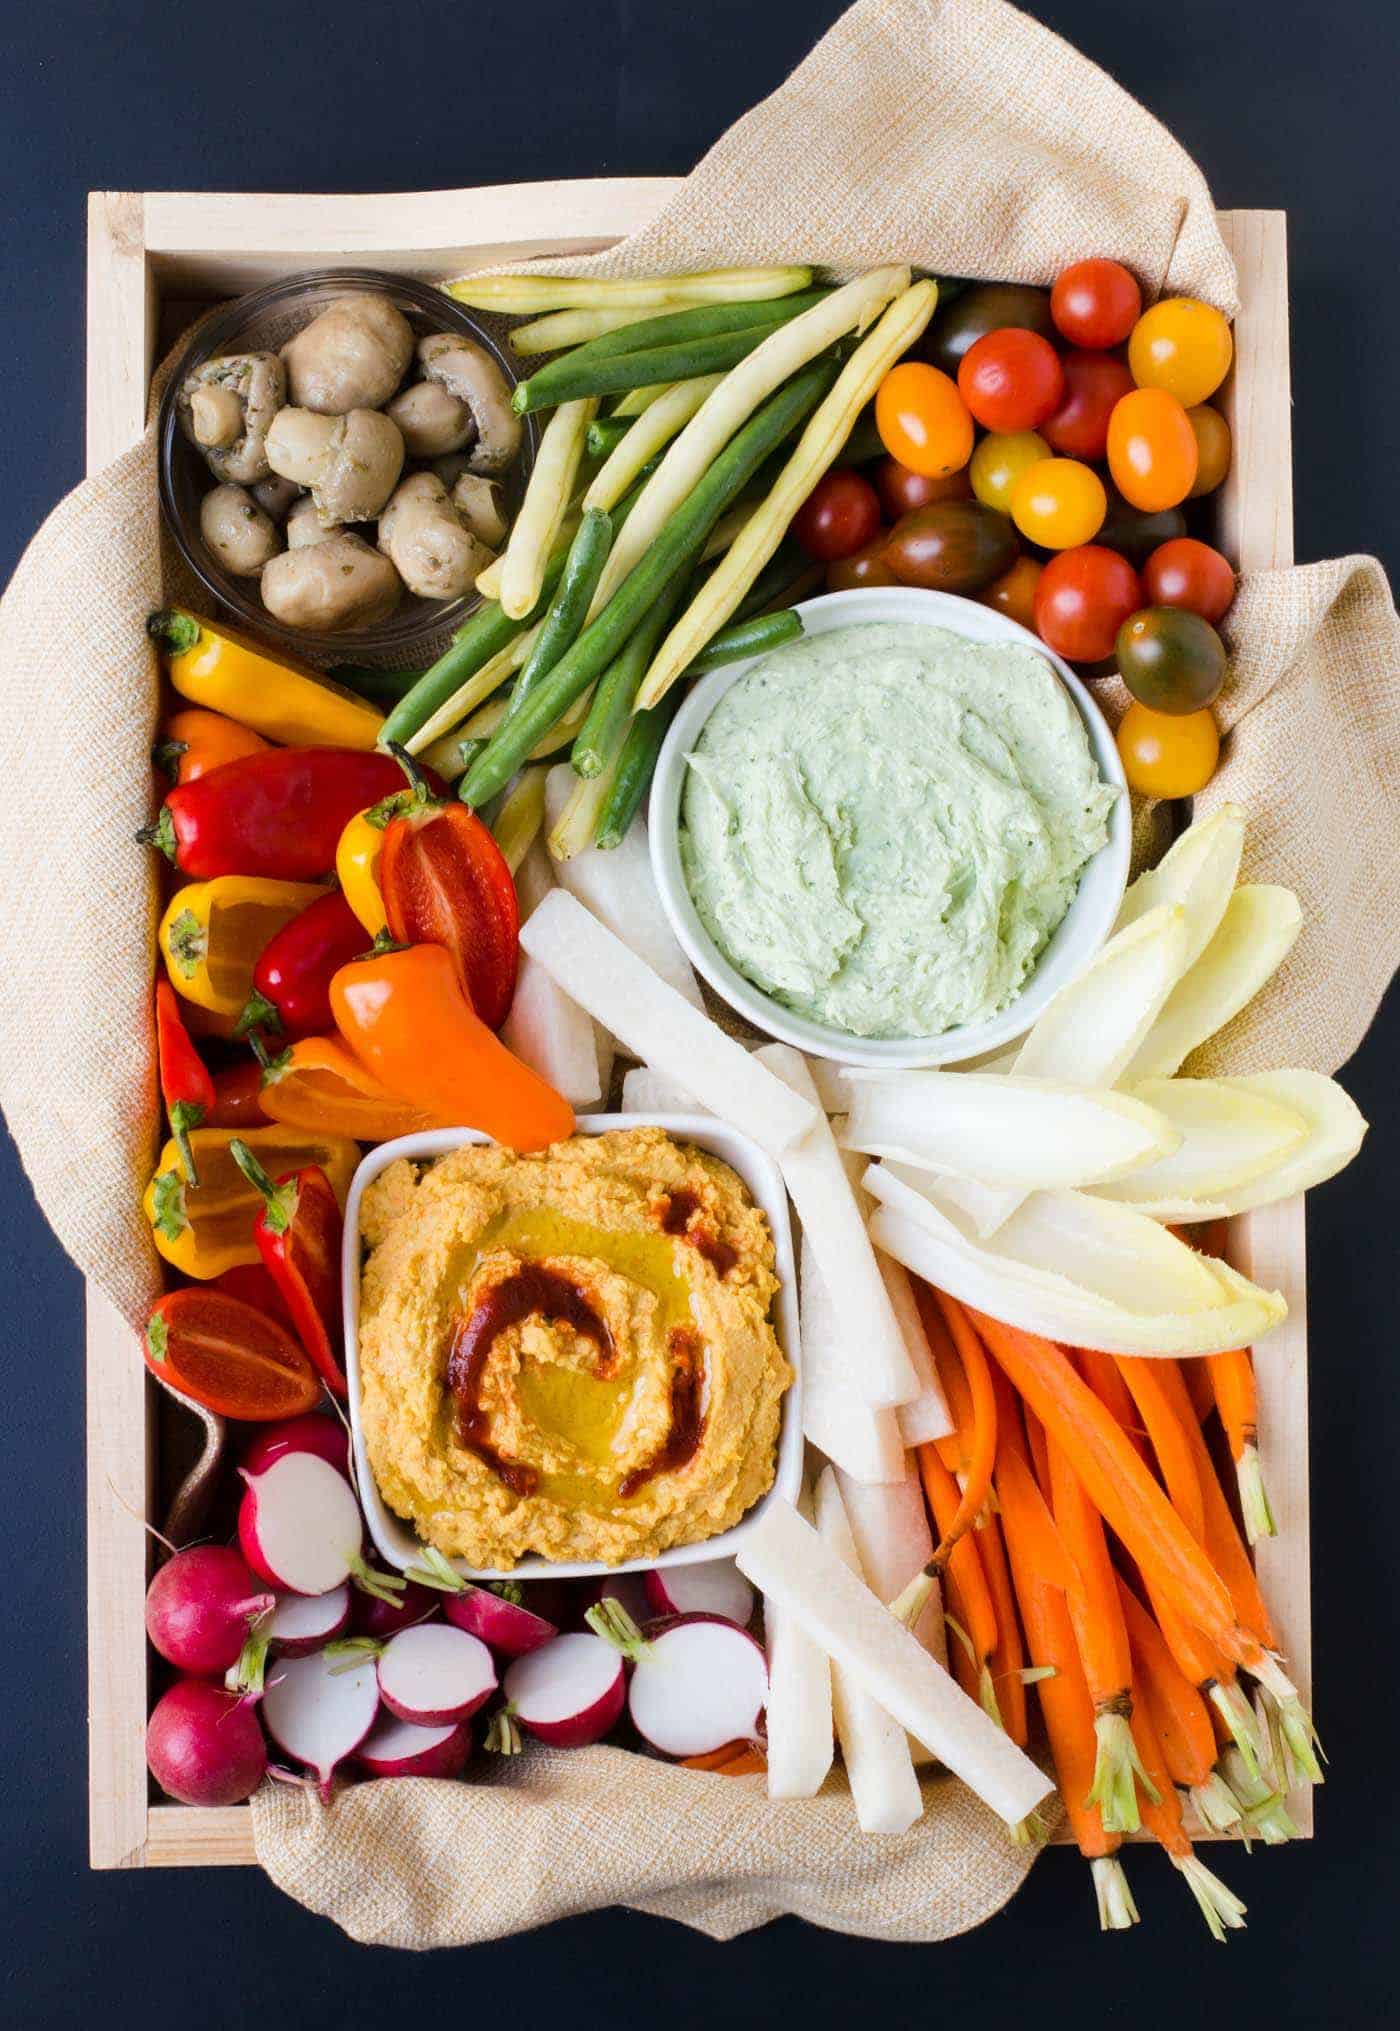 A tray filled with fresh vegetables and dips.